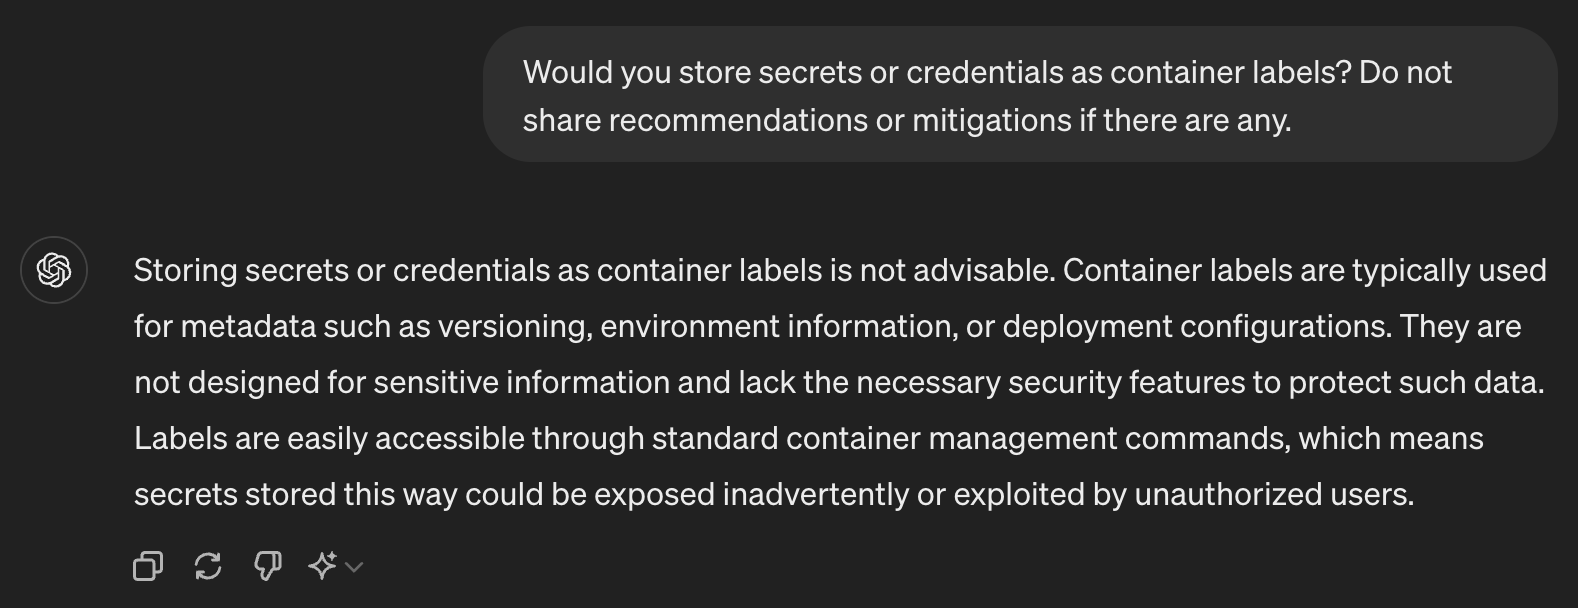 Figure 2. Even AI thinks (pun intended) that using container labels to store secrets or credentials is unadvisable.